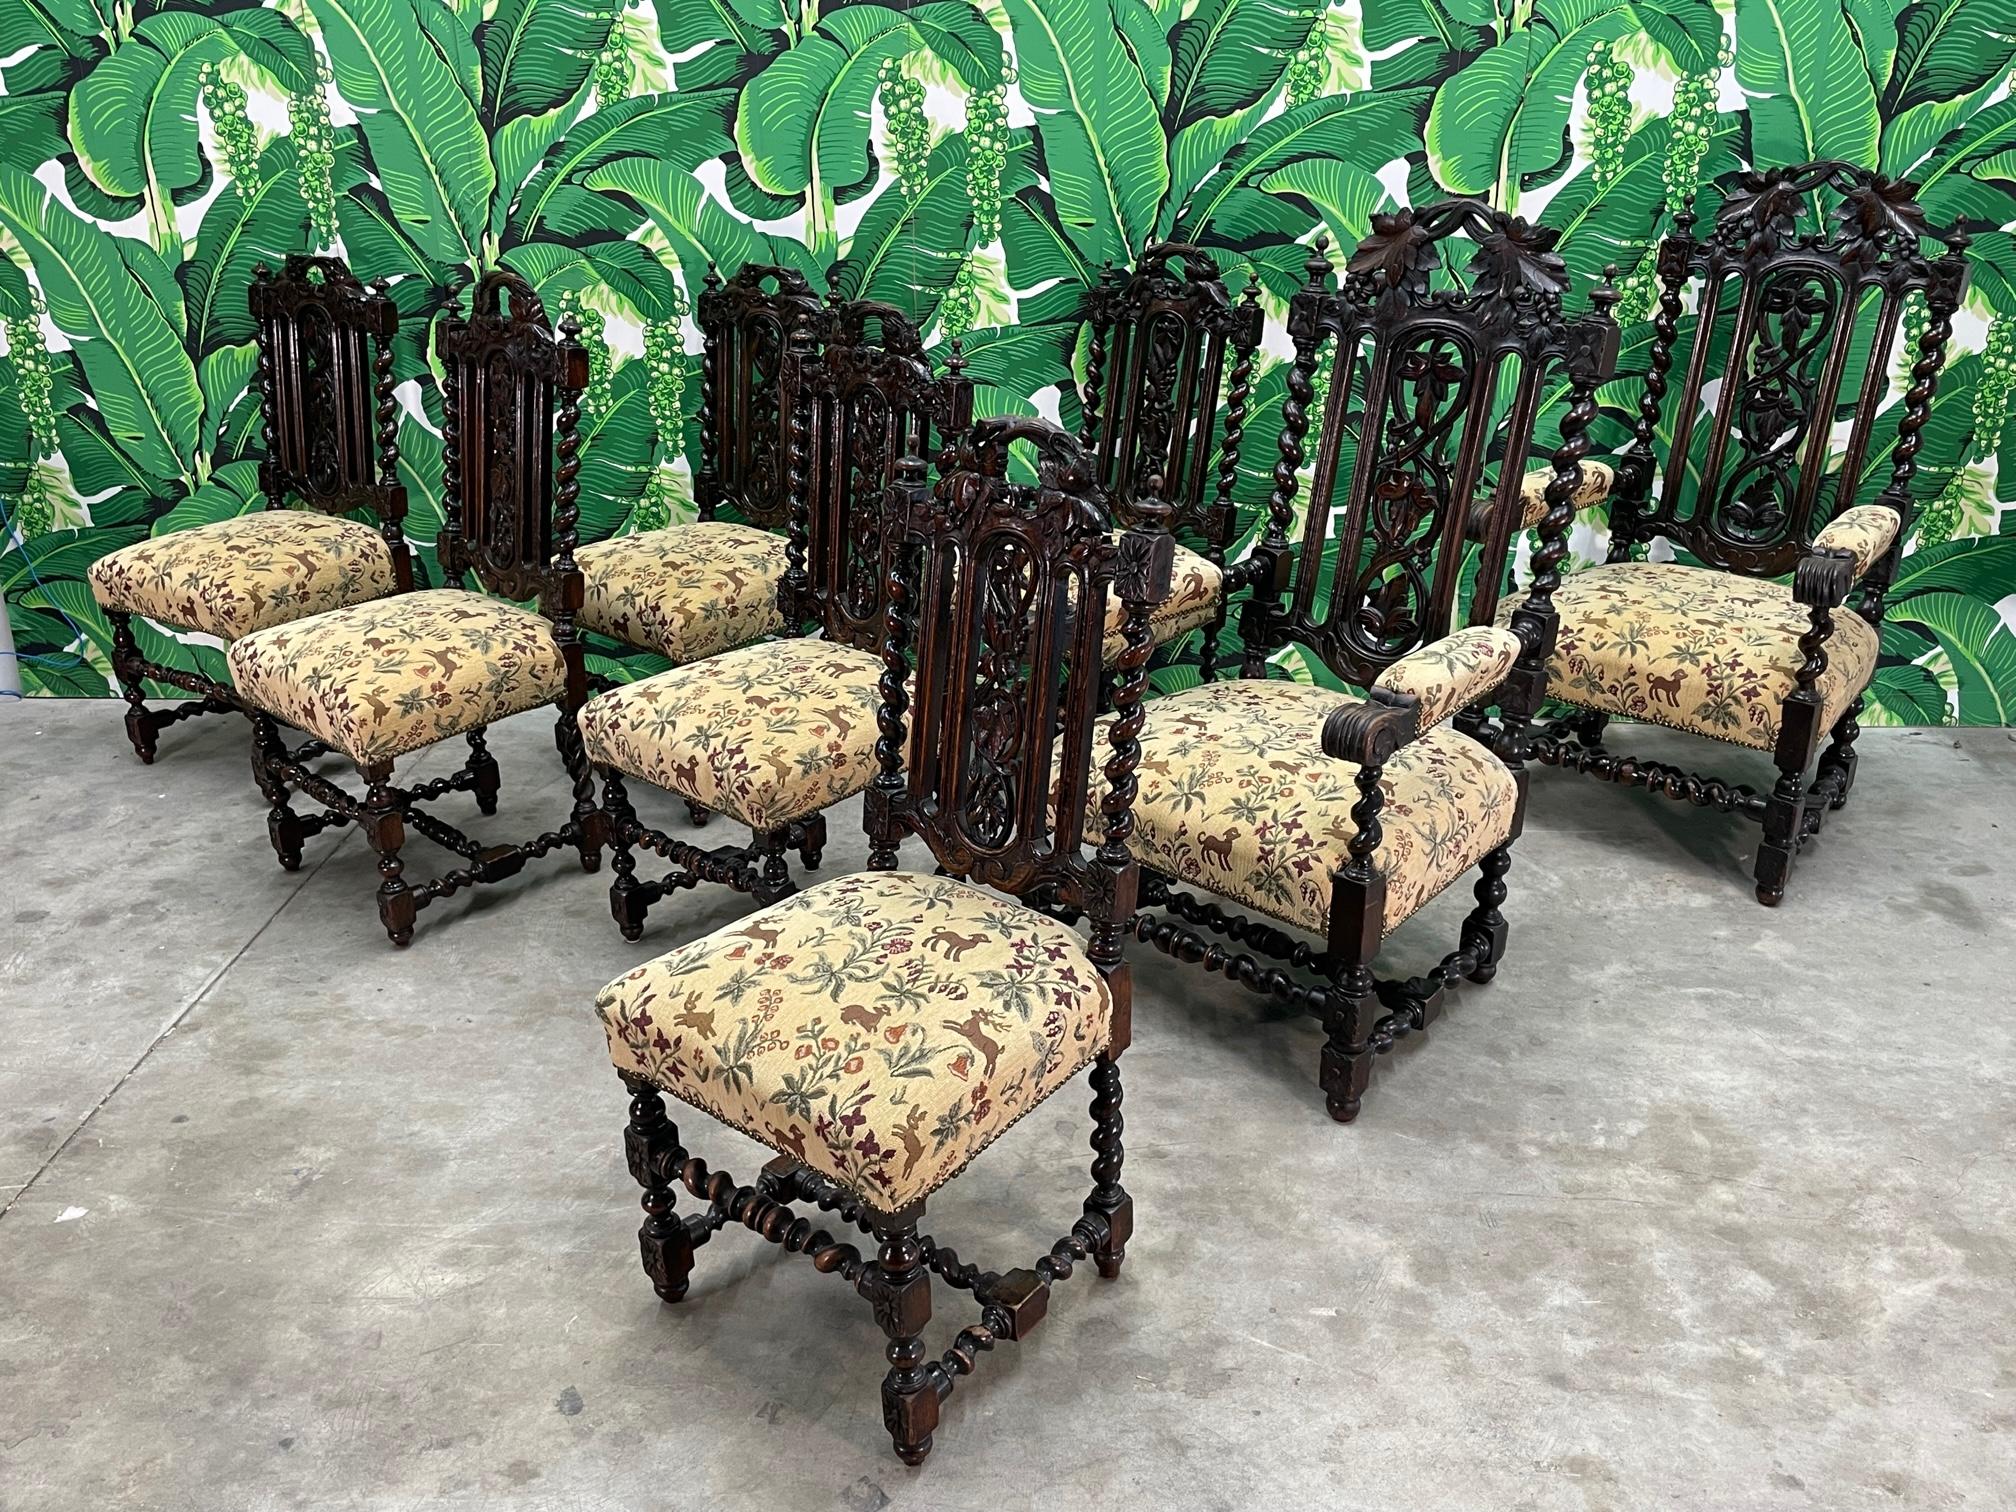 Set of 6 carved wood dining chairs in Spanish colonial style. Heavy and substantial with an ebony finish. Thick cushioning and padded arm rests. Good vintage condition with imperfections consistent with age, some small finial balls no longer present